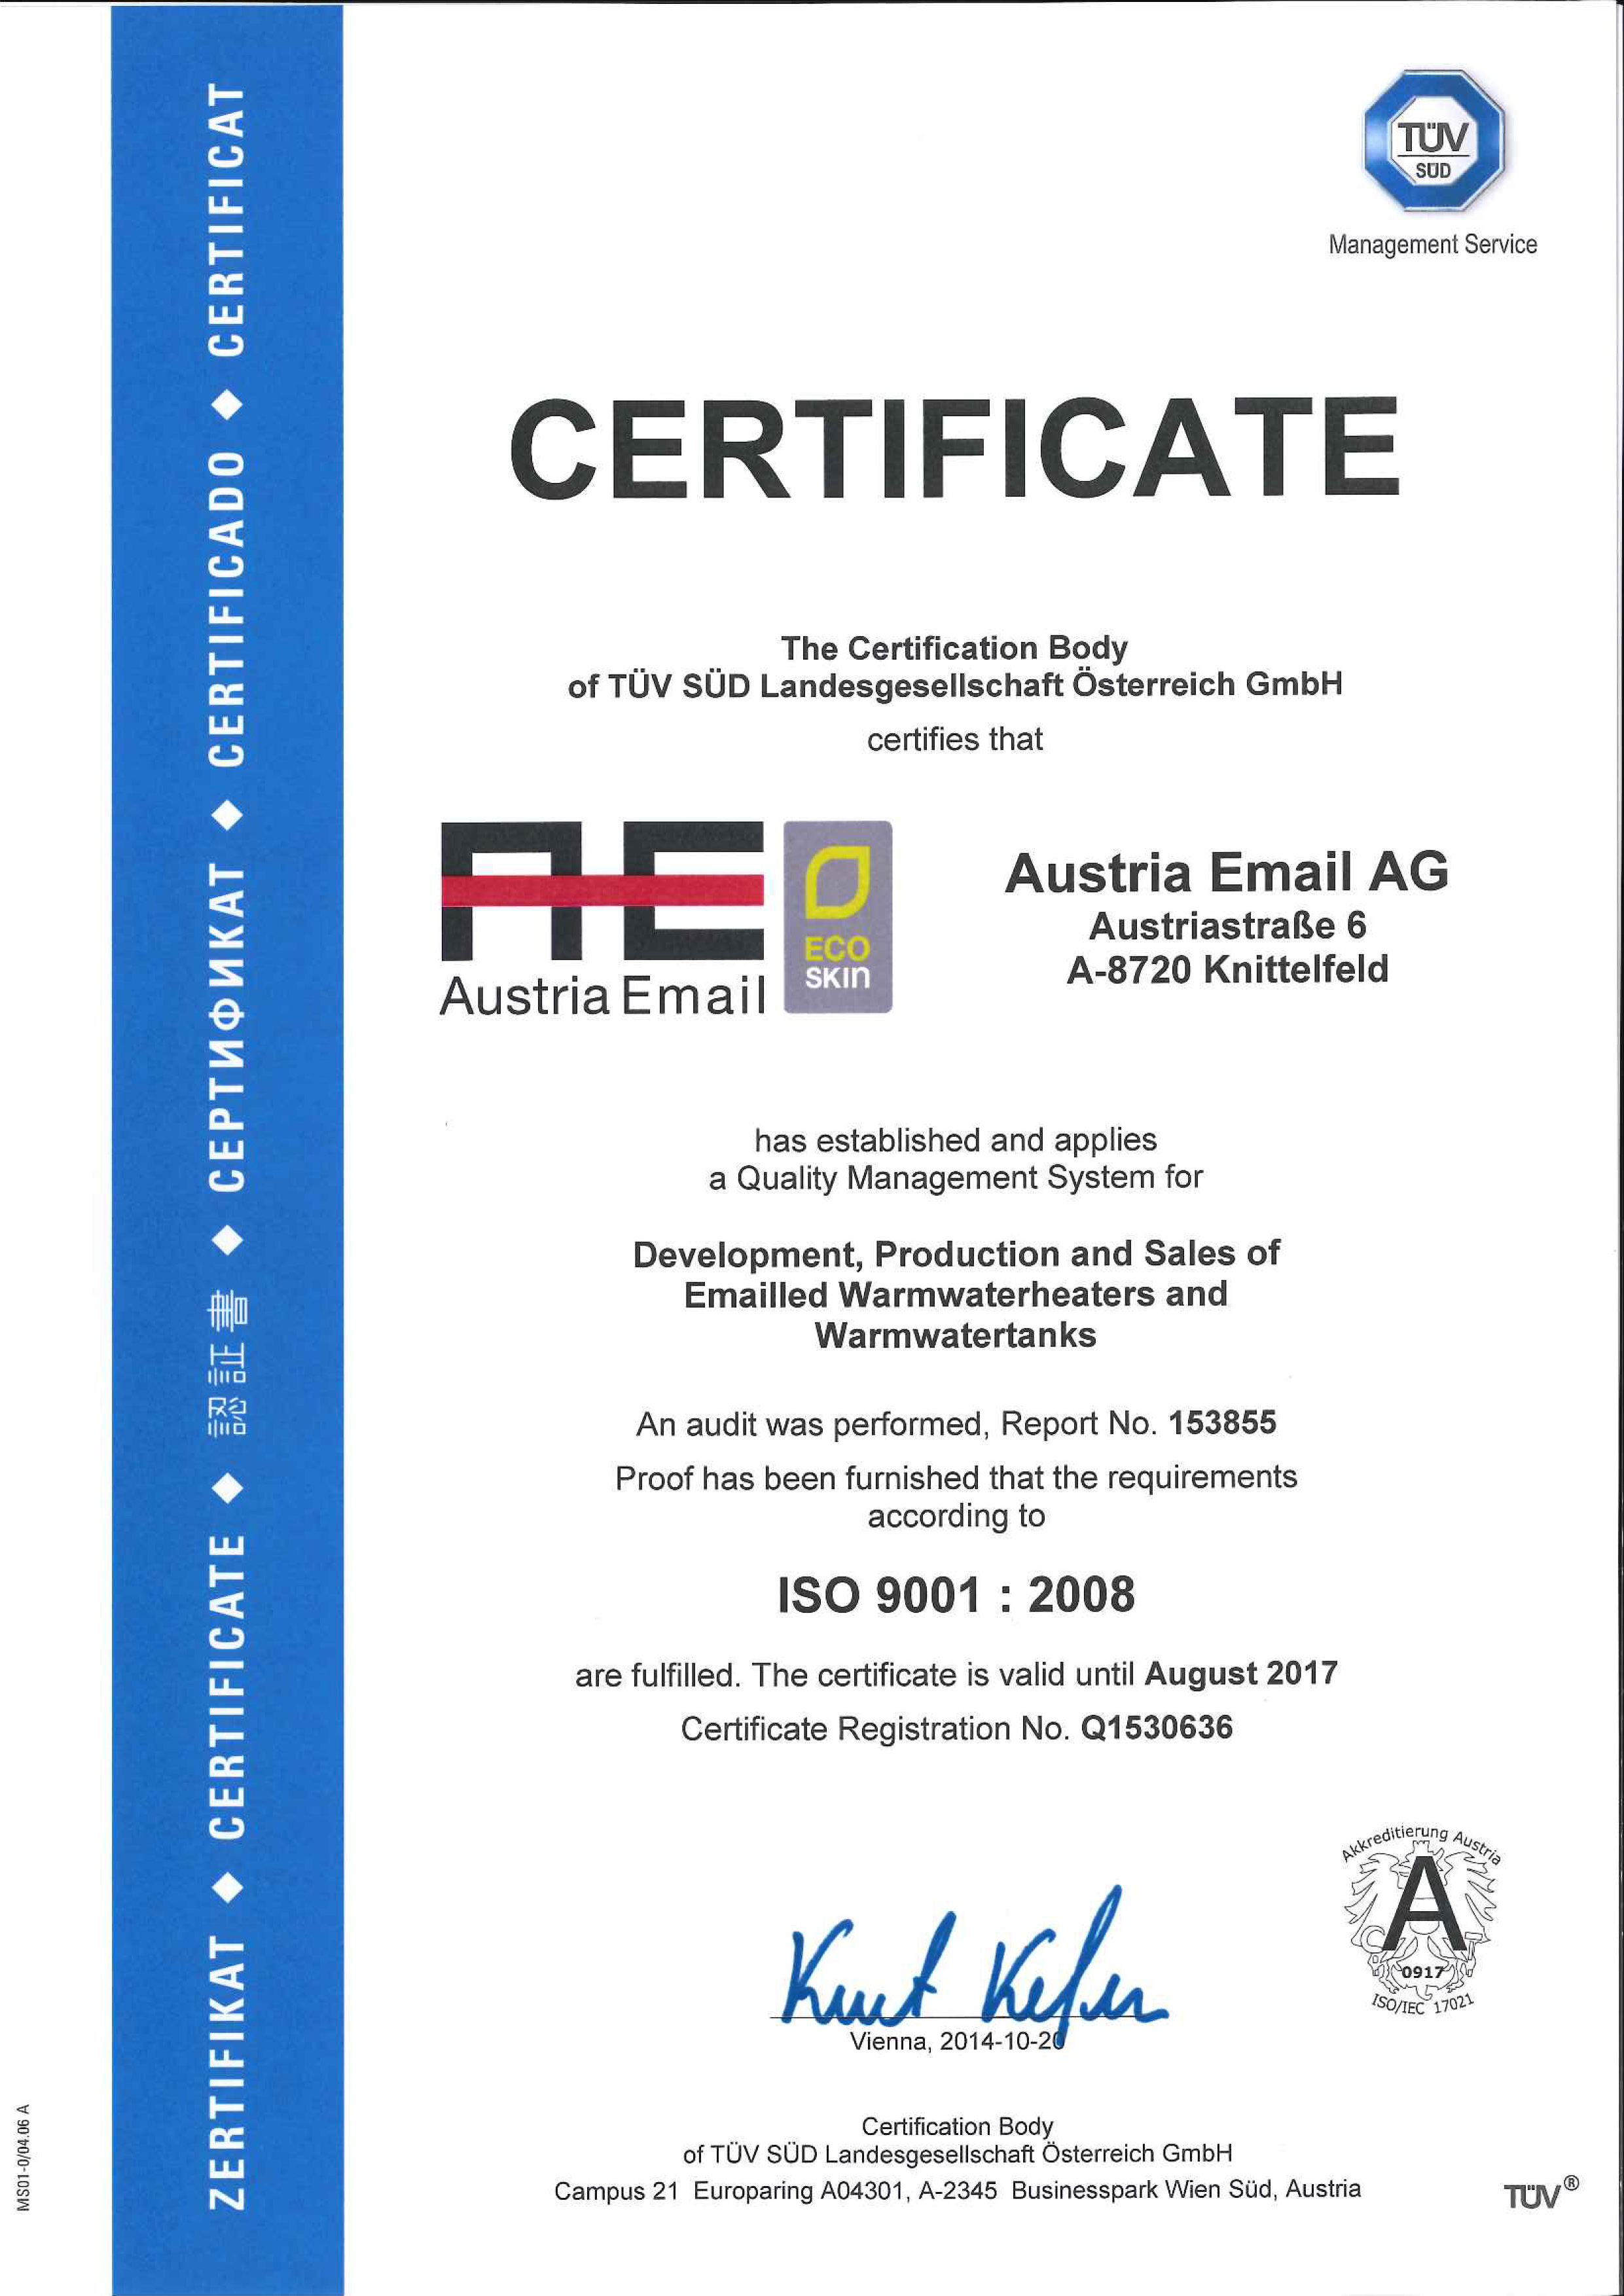 Austria Email AG Certificates ISO 9001 Ecoprofit award 